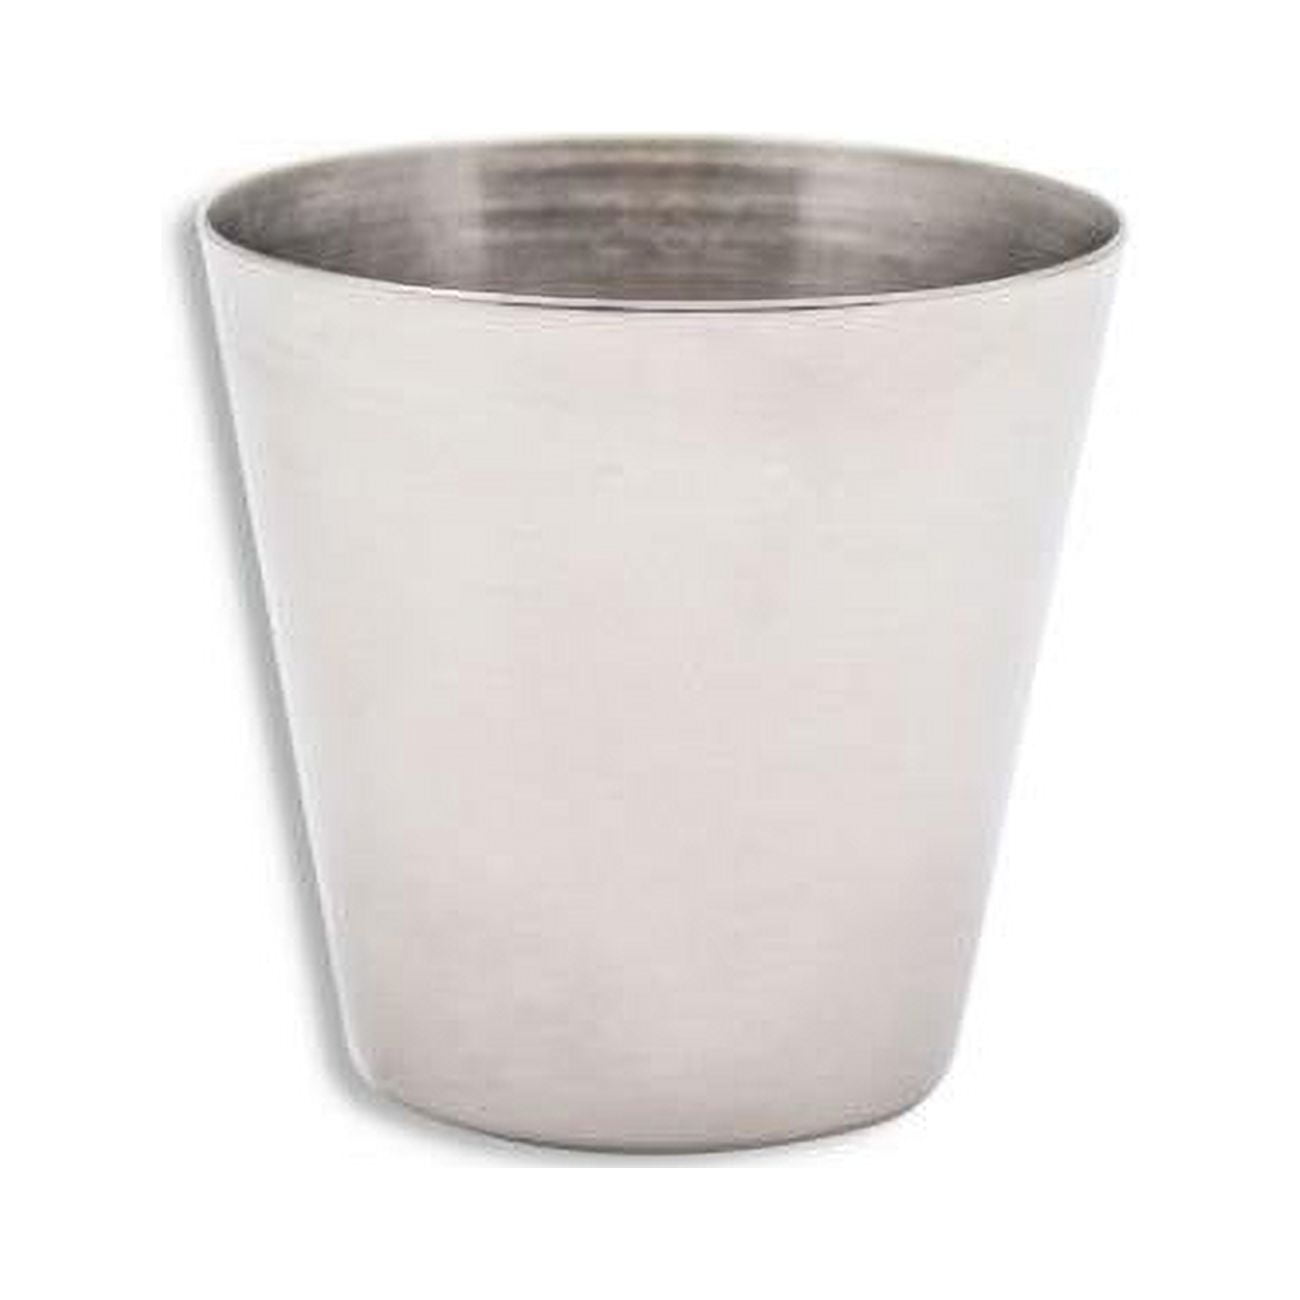 Picture of Tech Med 4241 2 oz Stainless Steel Medicine Cup